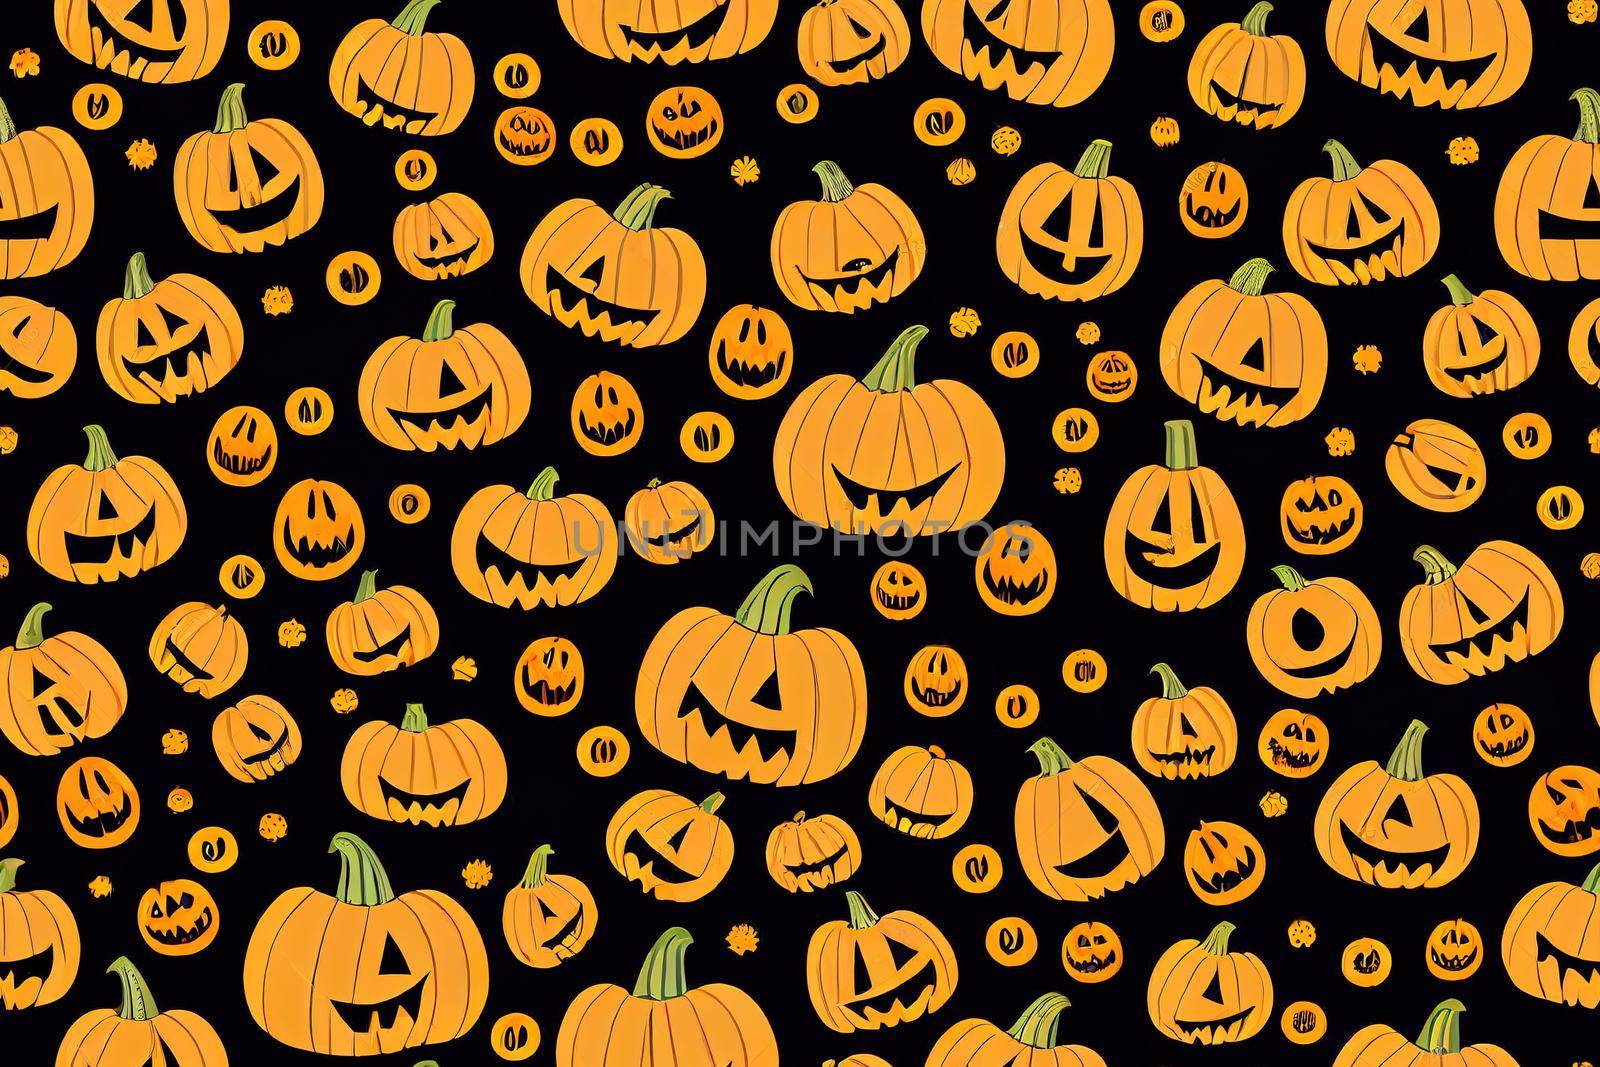 Halloween pattern Funny wallpaper for textile, Halloween party background with and horror design. Seamless pattern of Halloween with Cute Pumpkins and Spider Web Halloween Raster Design.